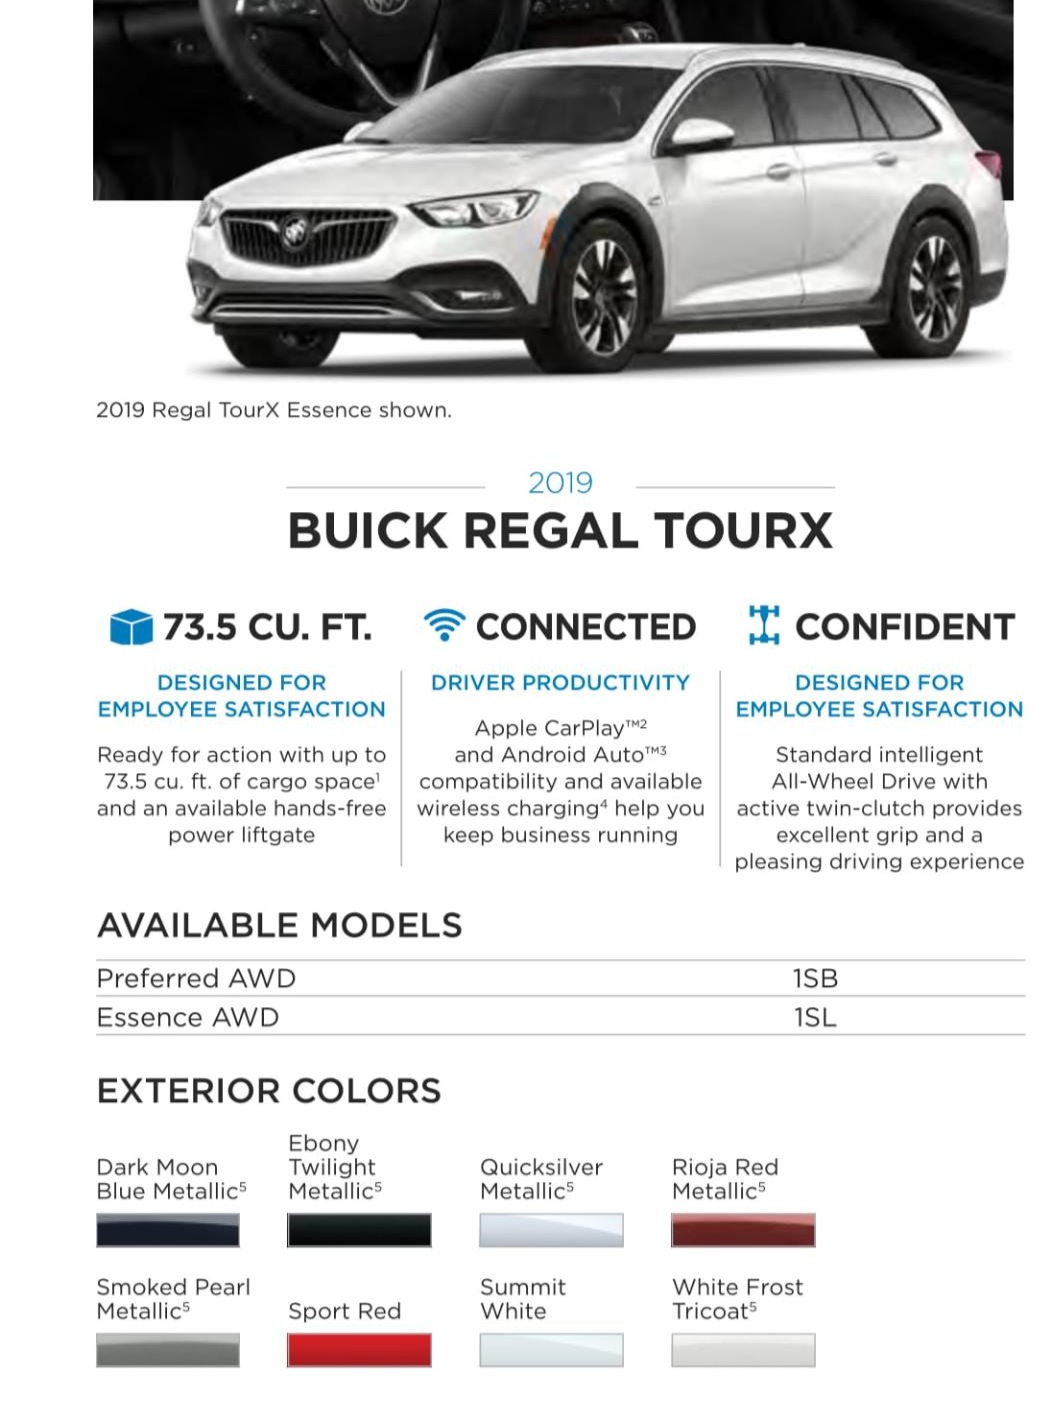 A photo showing the 8 different colors the 2019 Buick Regal Tourx used.